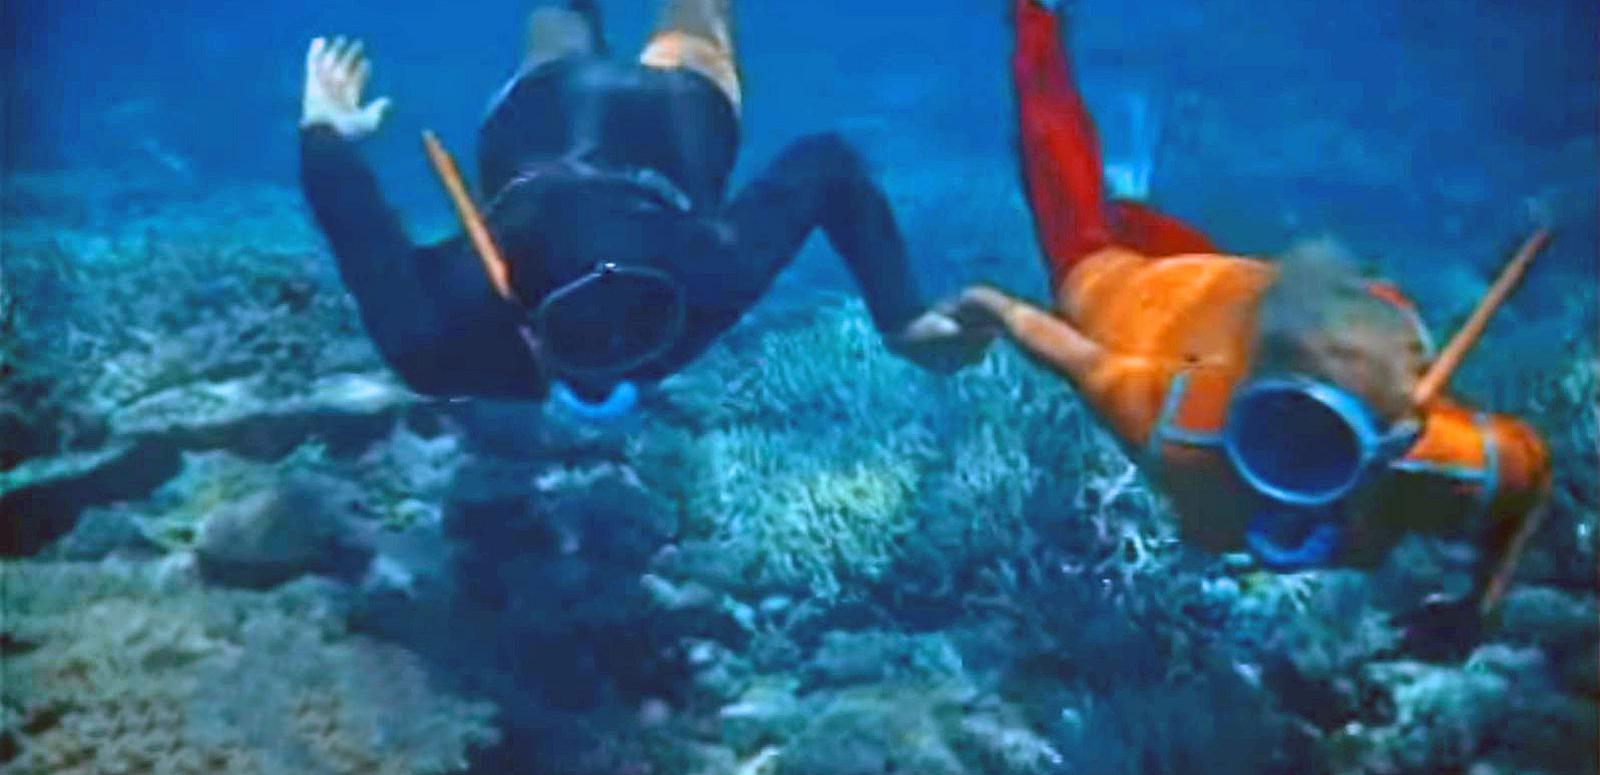 Frame capture of two people holding hands and snorkeling along a coral seabed.